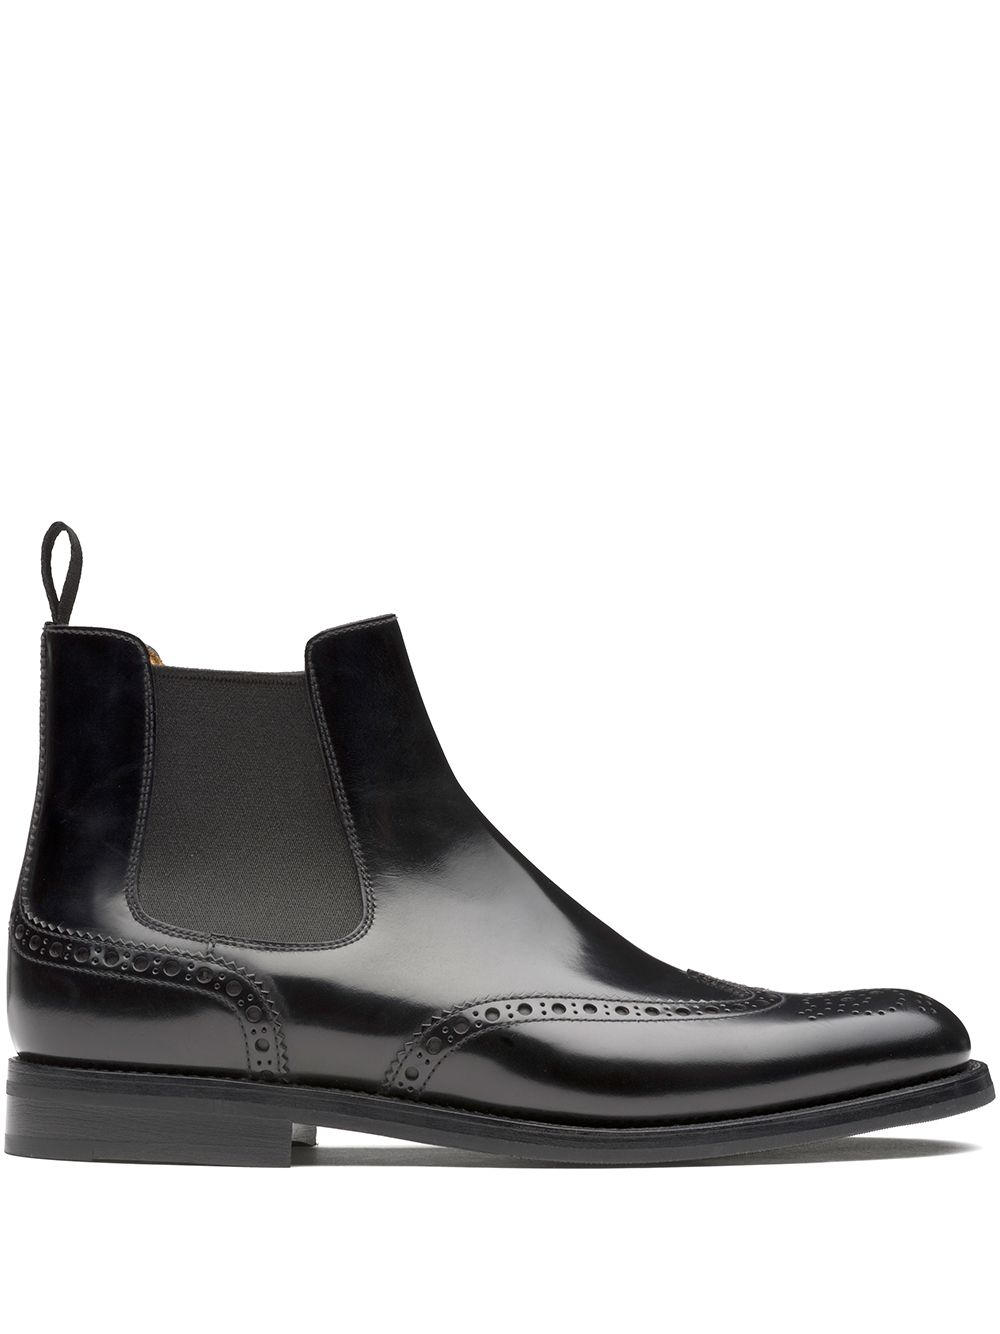 Church's Ketsby polished Chelsea boots | More designer brands, Oxford